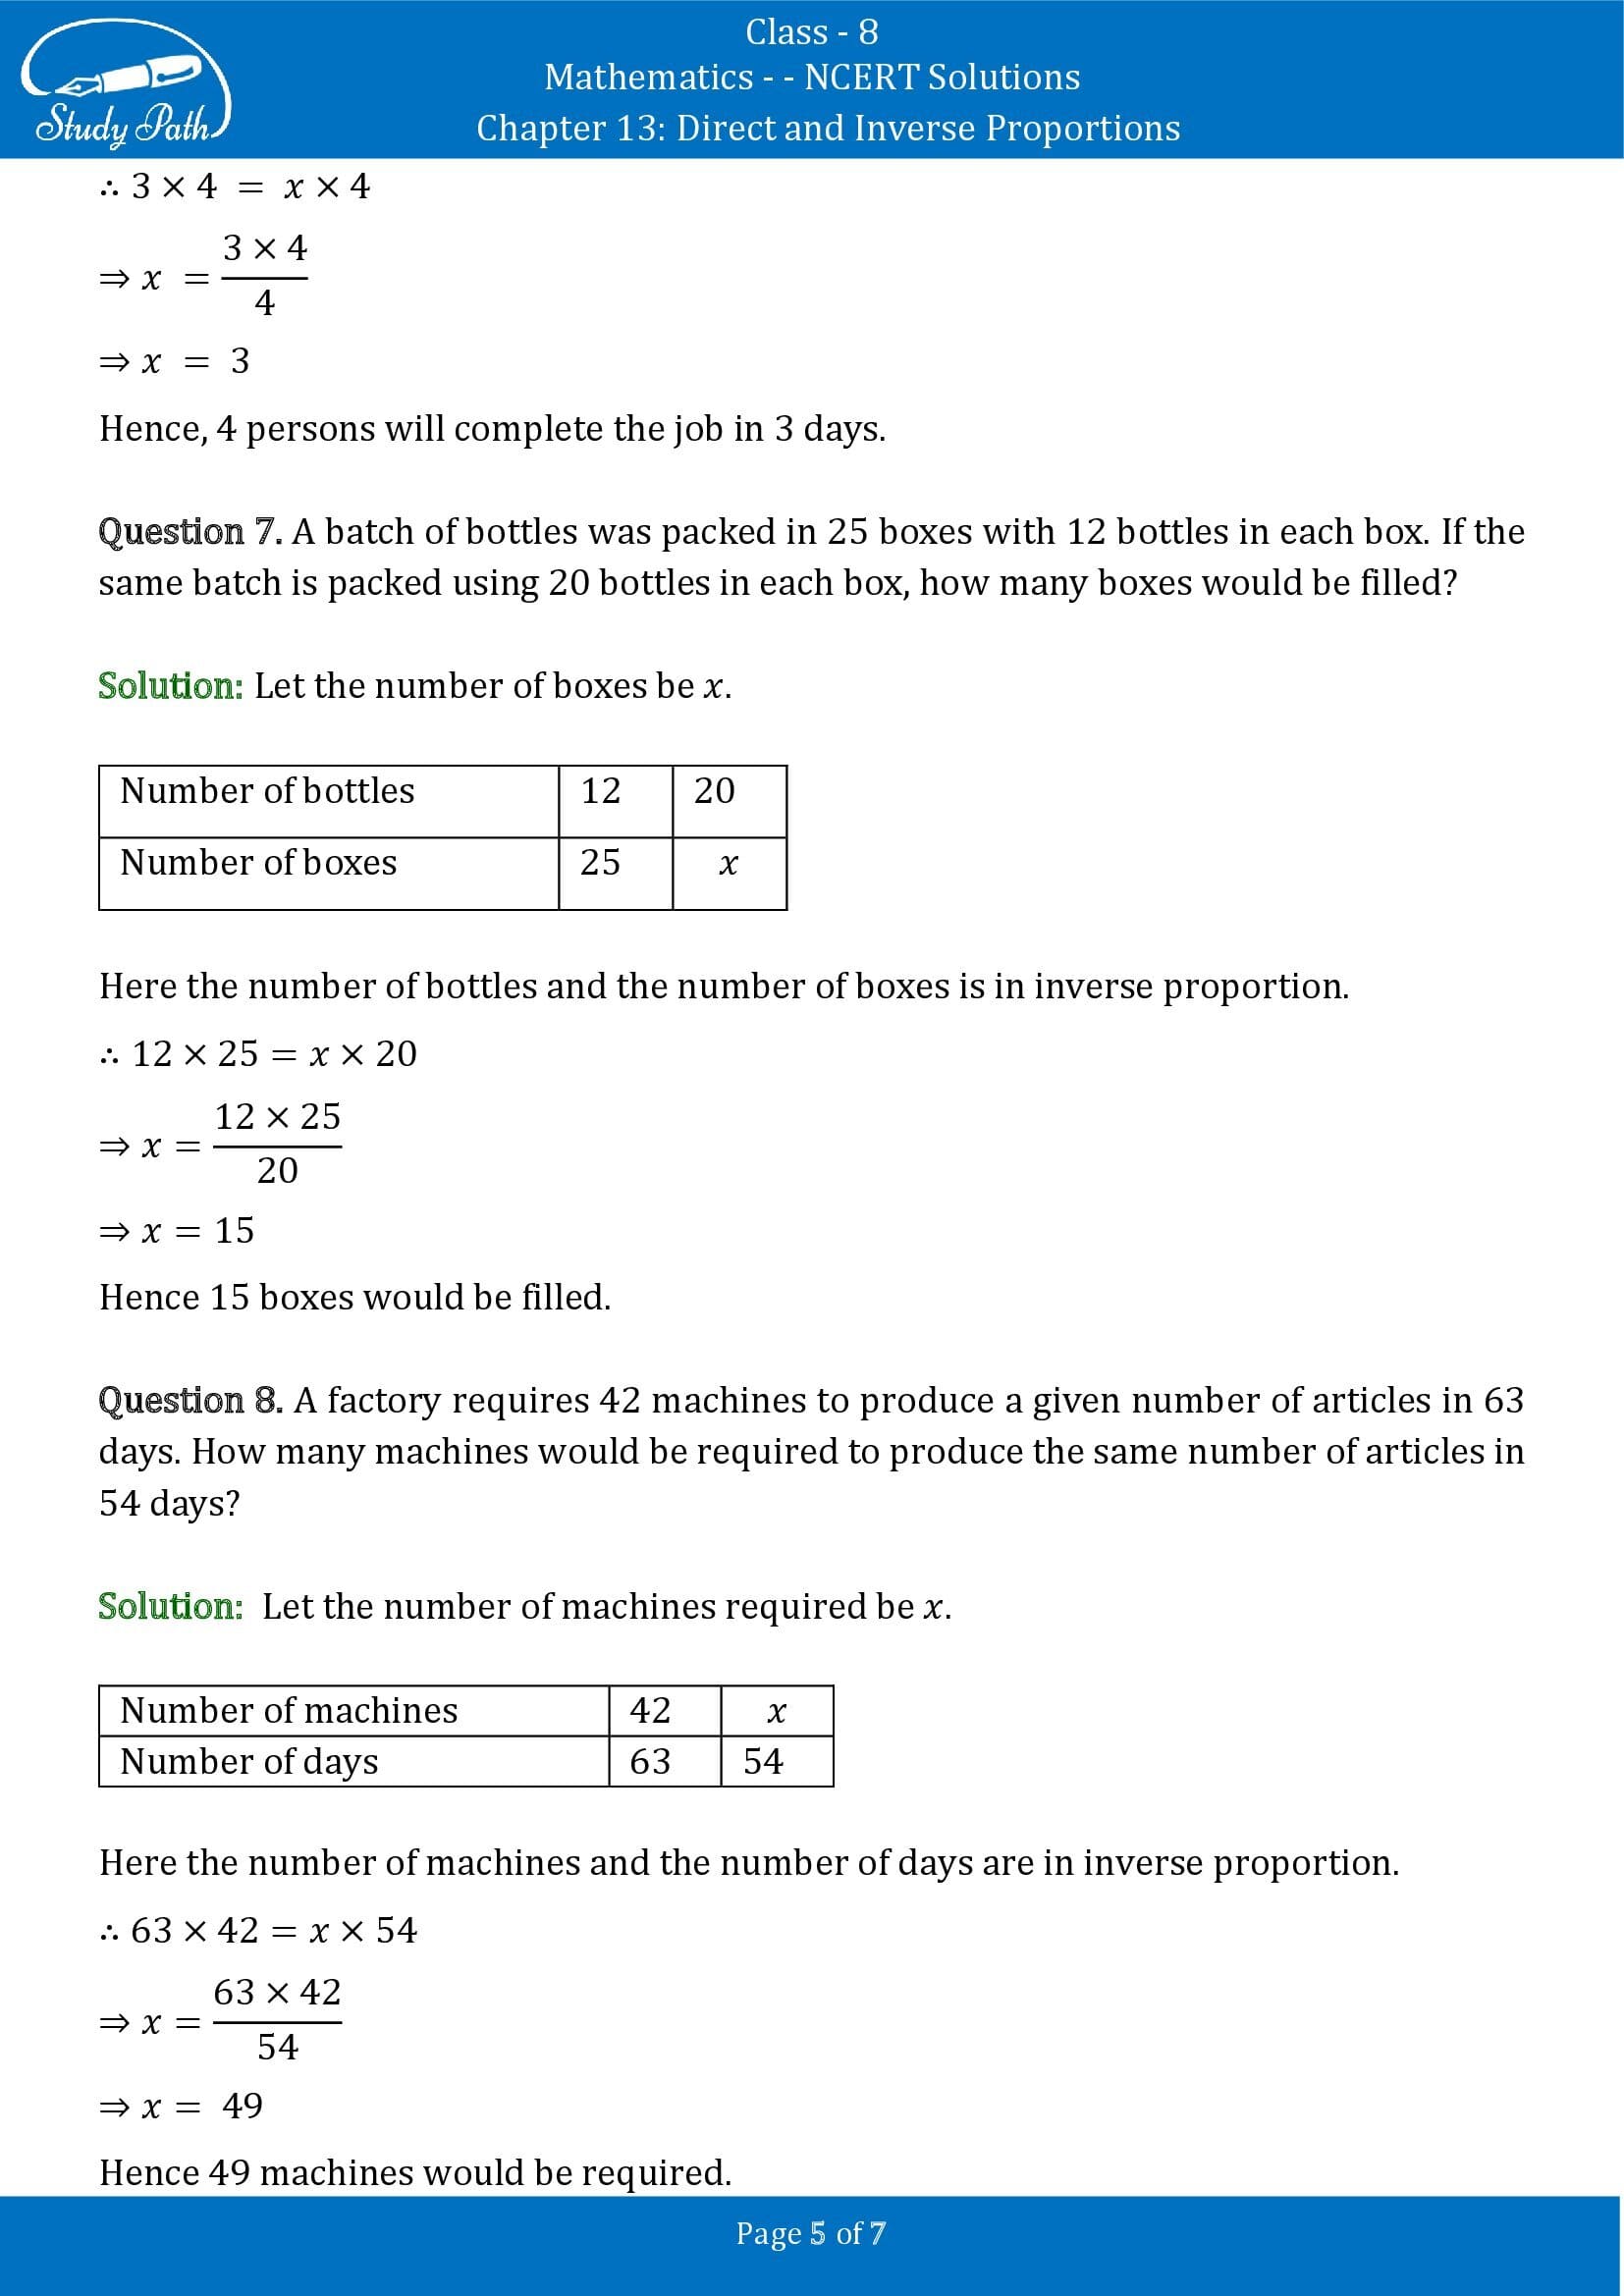 NCERT Solutions for Class 8 Maths Chapter 13 Direct and Inverse Proportions Exercise 13.2 00005